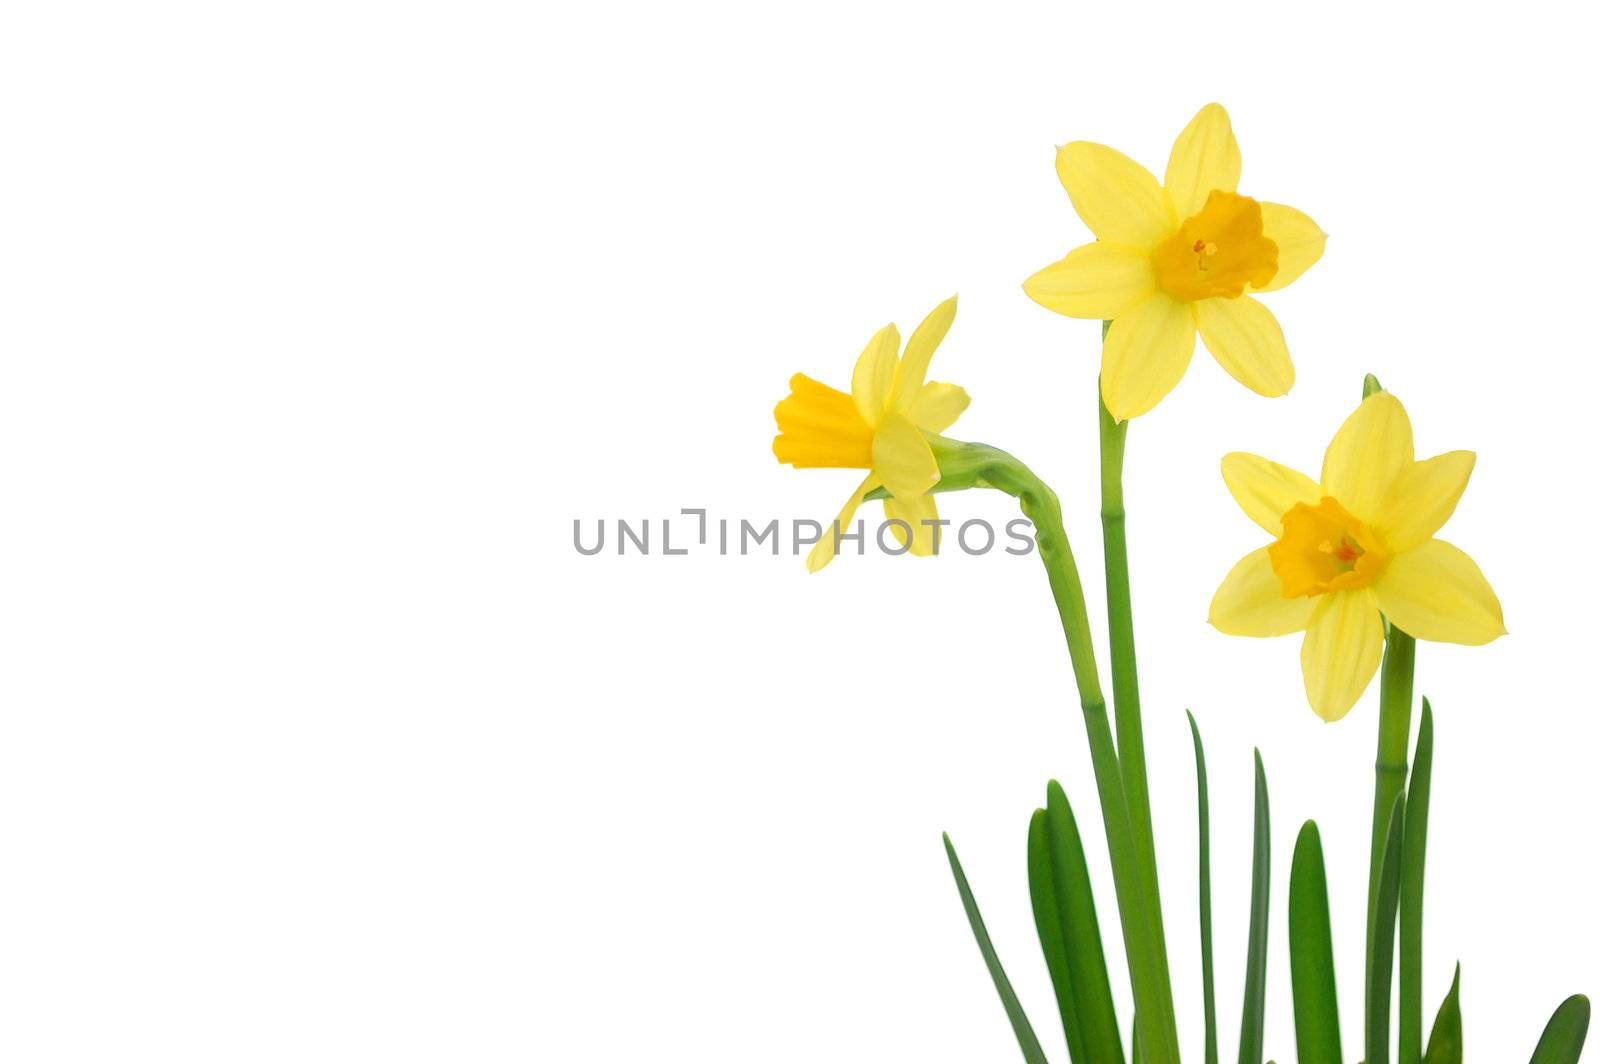 Spring daffodils isolated on white (also space for text)